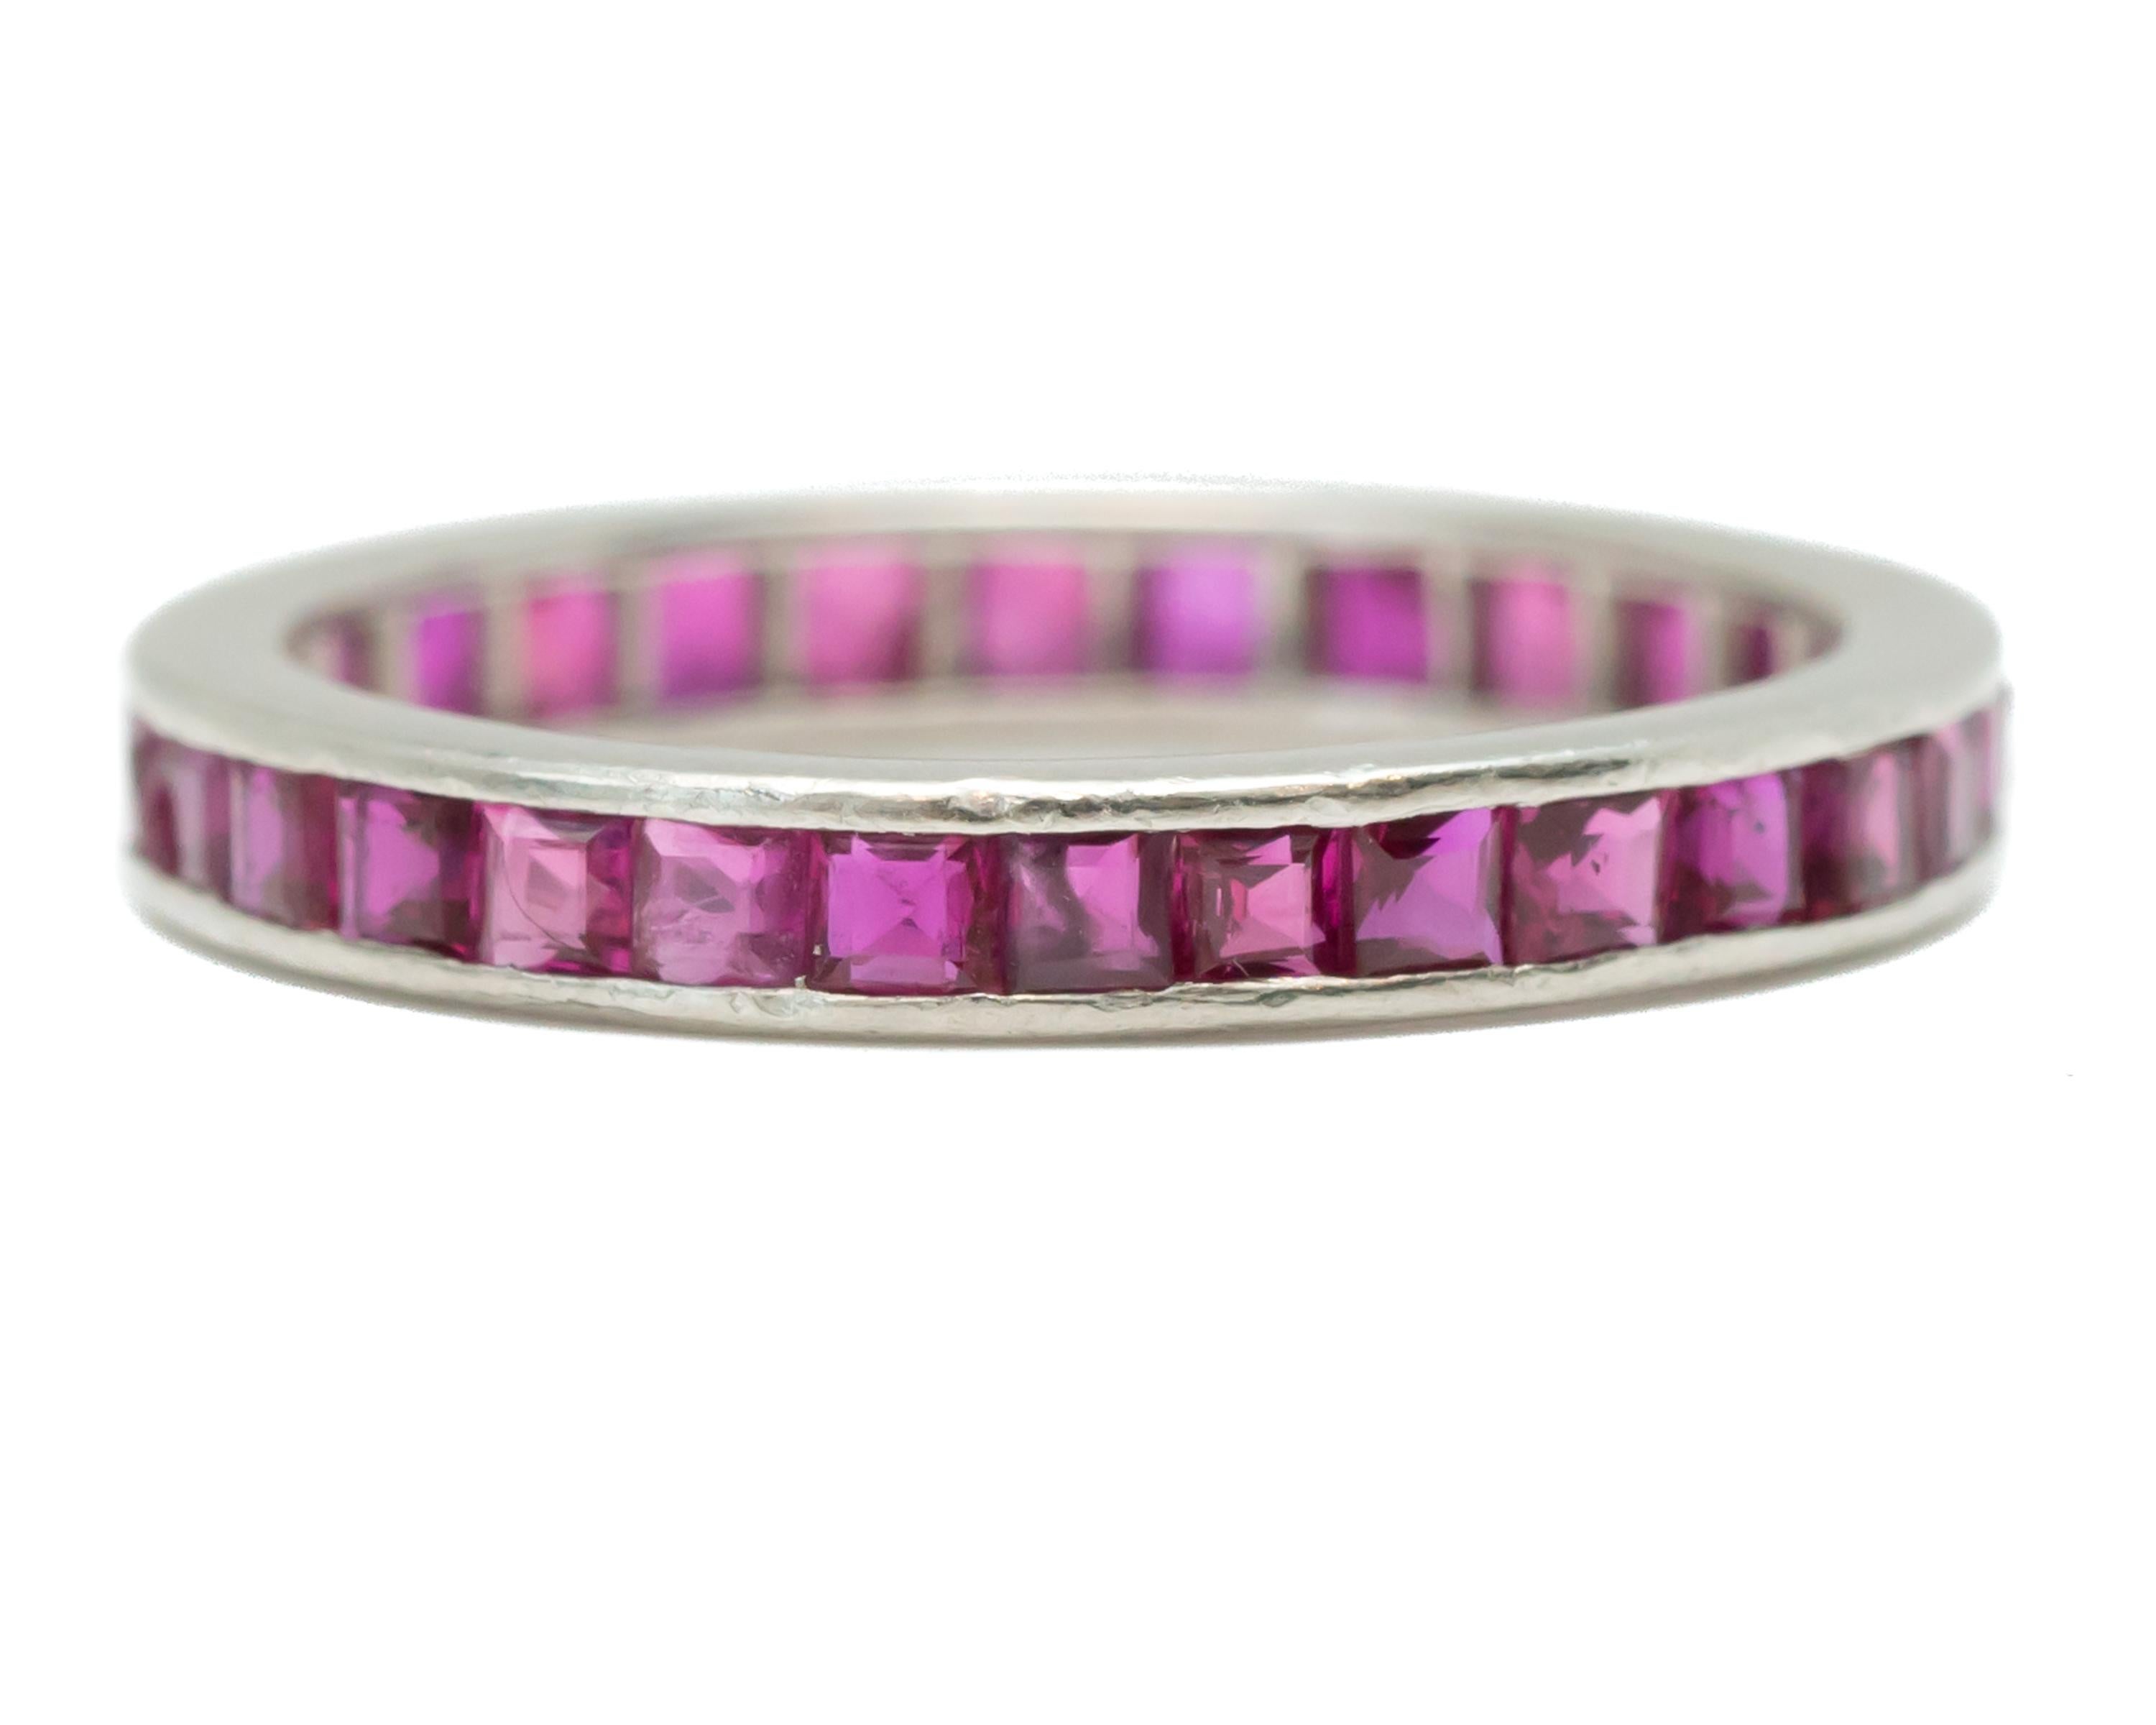 1930s Art Deco Ruby Eternity Band - Platinum, Rubies

Features:
French cut Square Rubies
Channel Set Rubies
Pinkish Red Rubies
Platinum Setting
Eternity Band Design
2.7 millimeters wide band
2 millimeters finger to top of ring
Ring fits a size 5.75,